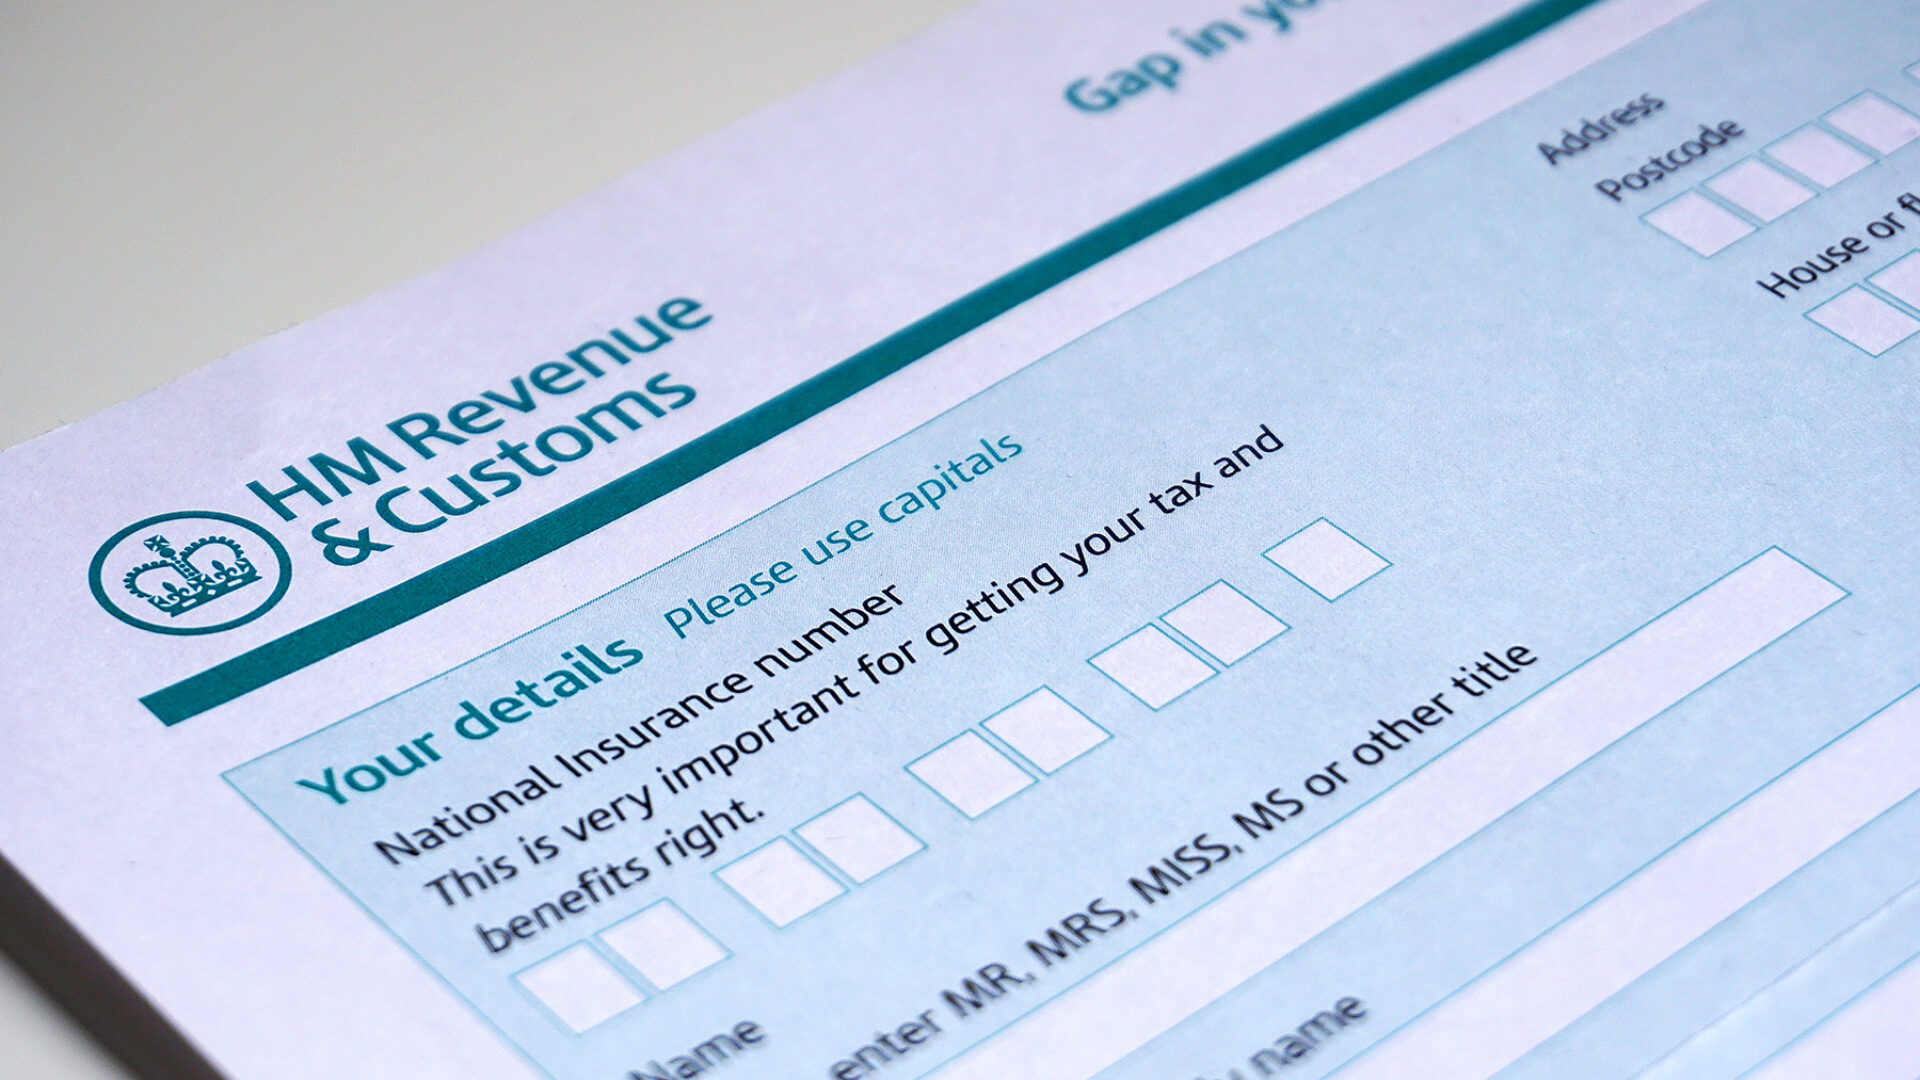 Hmrc Tax Return Free Contact Number